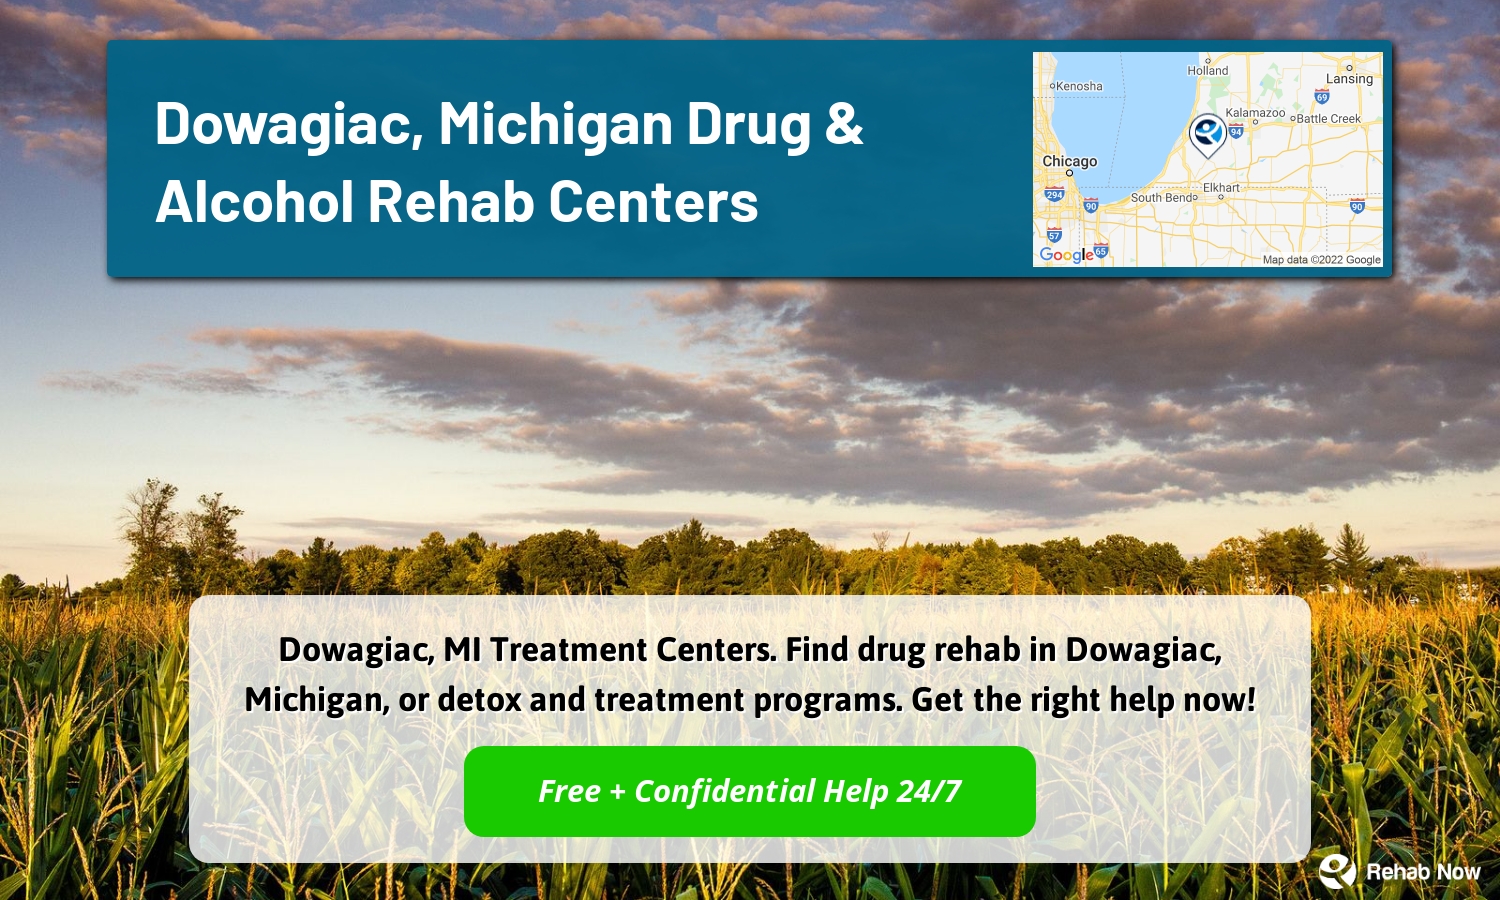 Dowagiac, MI Treatment Centers. Find drug rehab in Dowagiac, Michigan, or detox and treatment programs. Get the right help now!